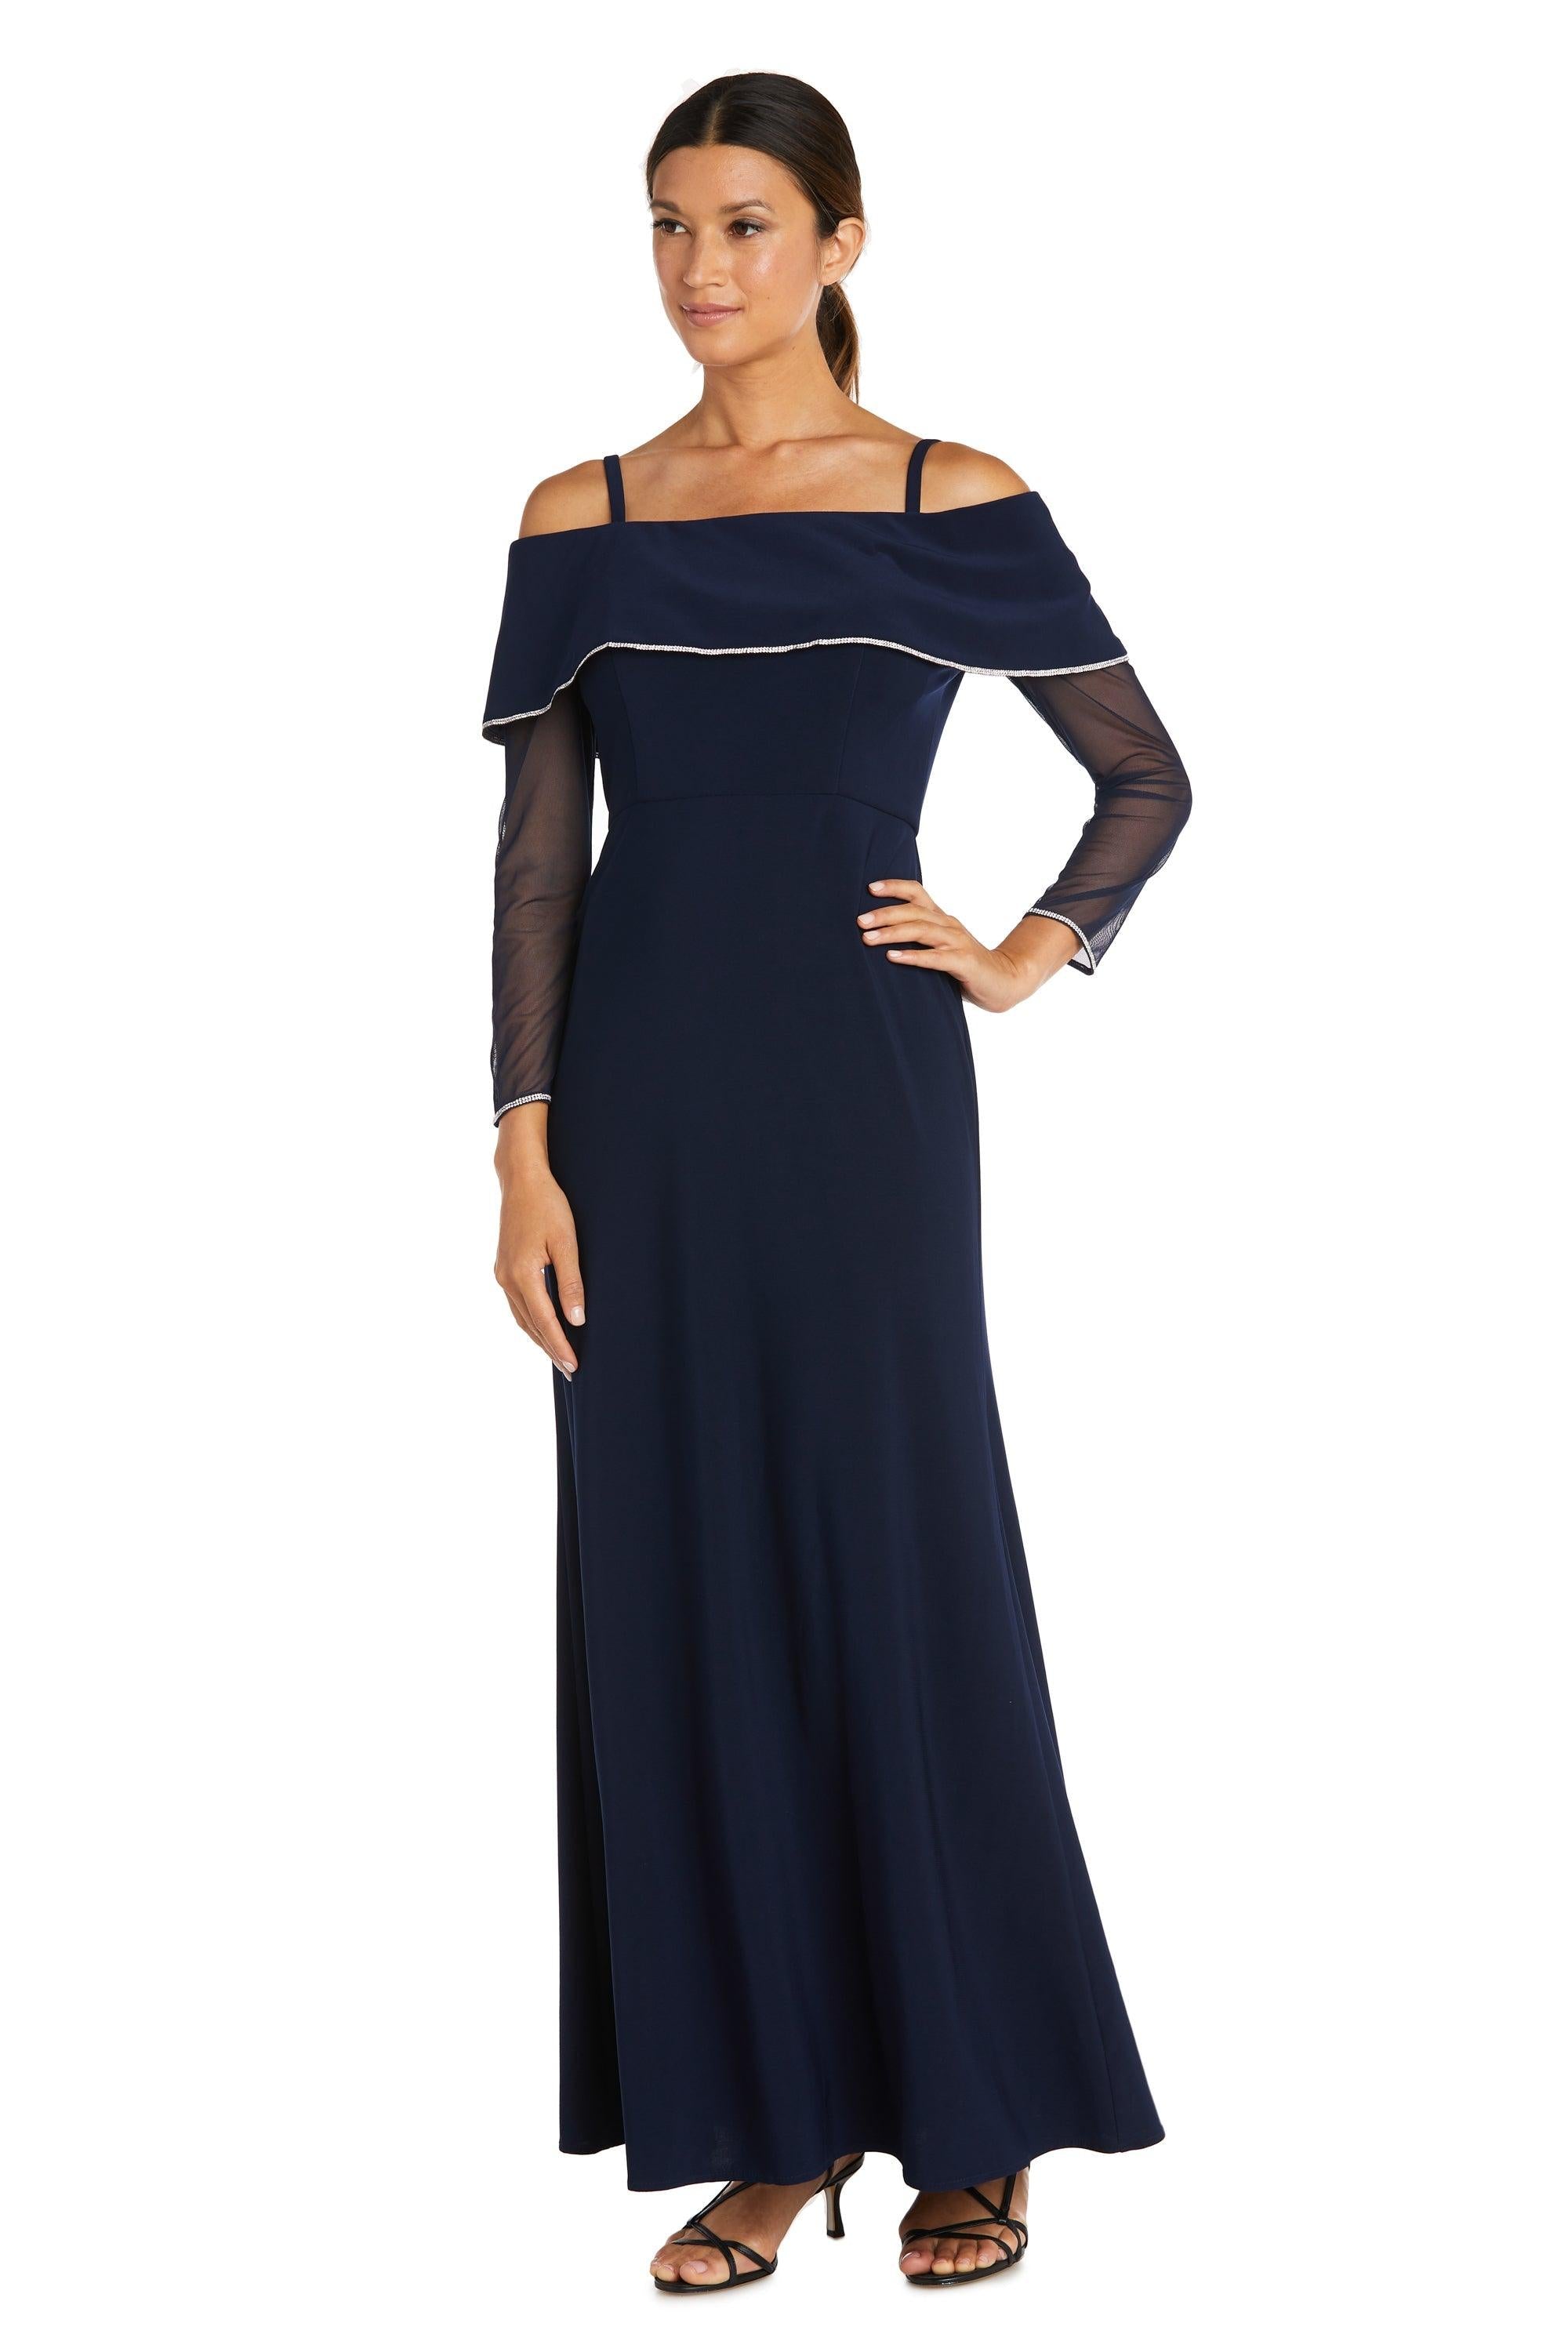 R&M Richards Mother of the Bride Long Dress 2637 - The Dress Outlet